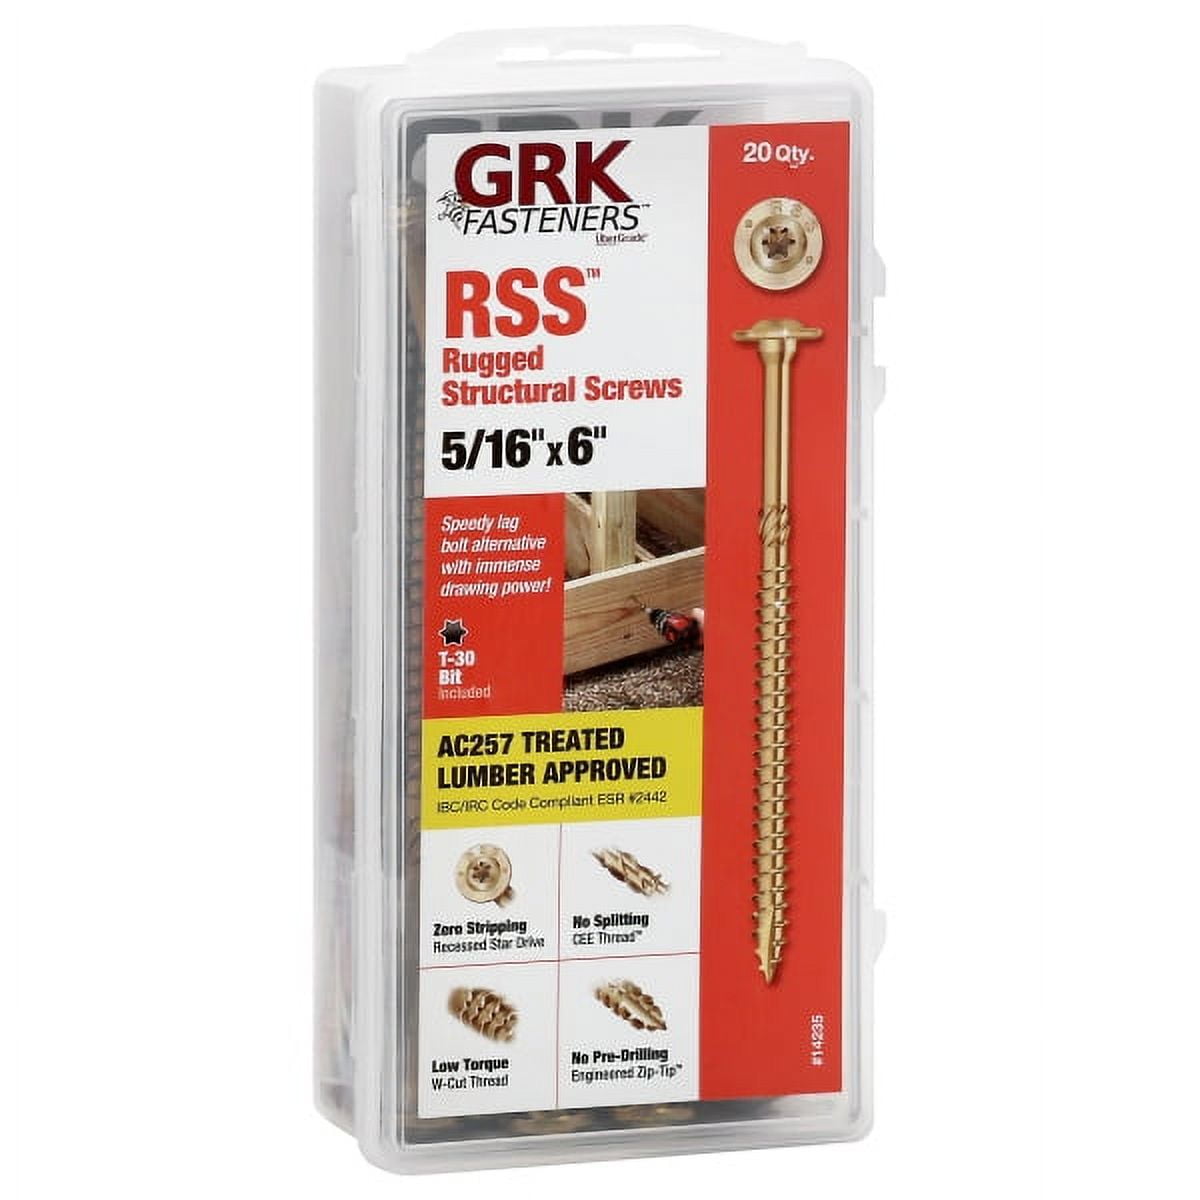 Picture of GRK Fasteners 5913751 0.31 x 6 in. Star Self Tapping Zinc Construction Screws, Yellow